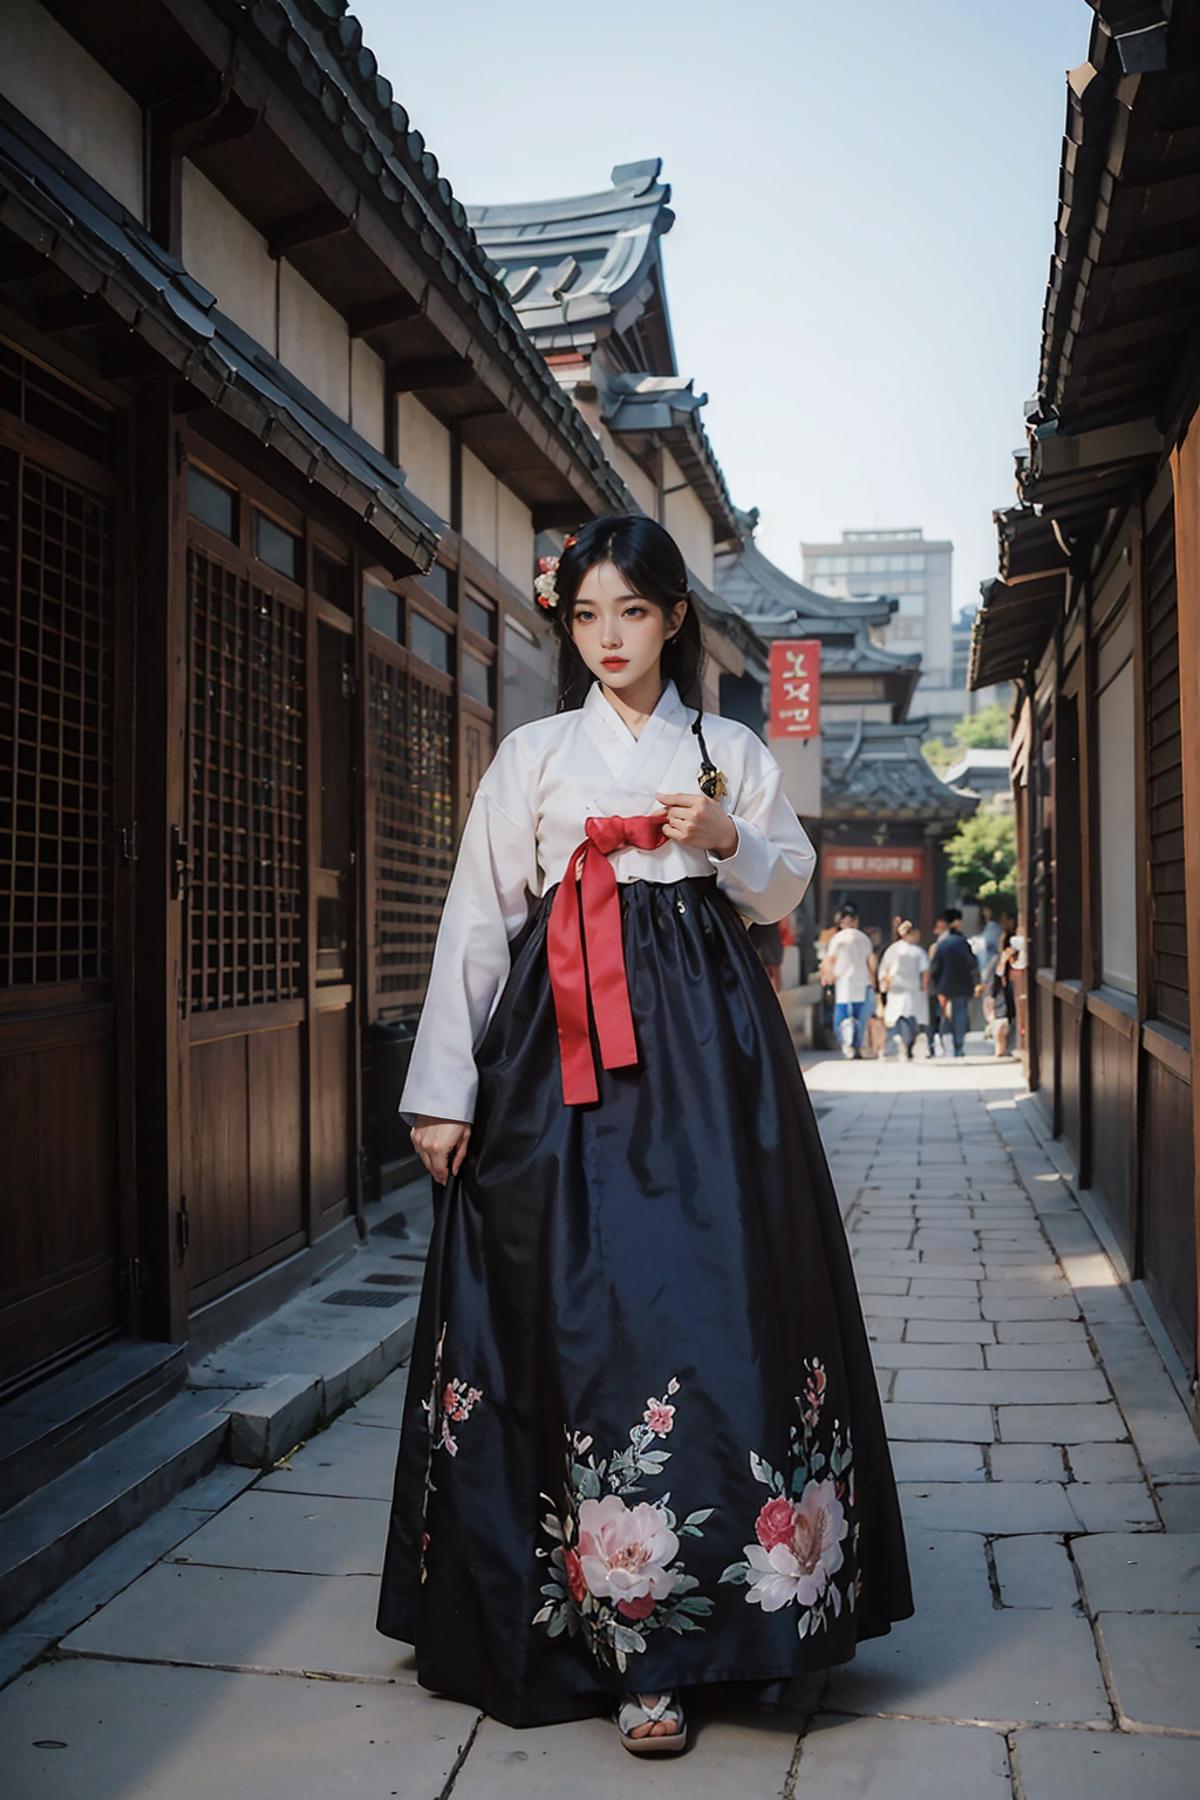 Female Noble Class Hanbok - Korea Clothes image by BWING